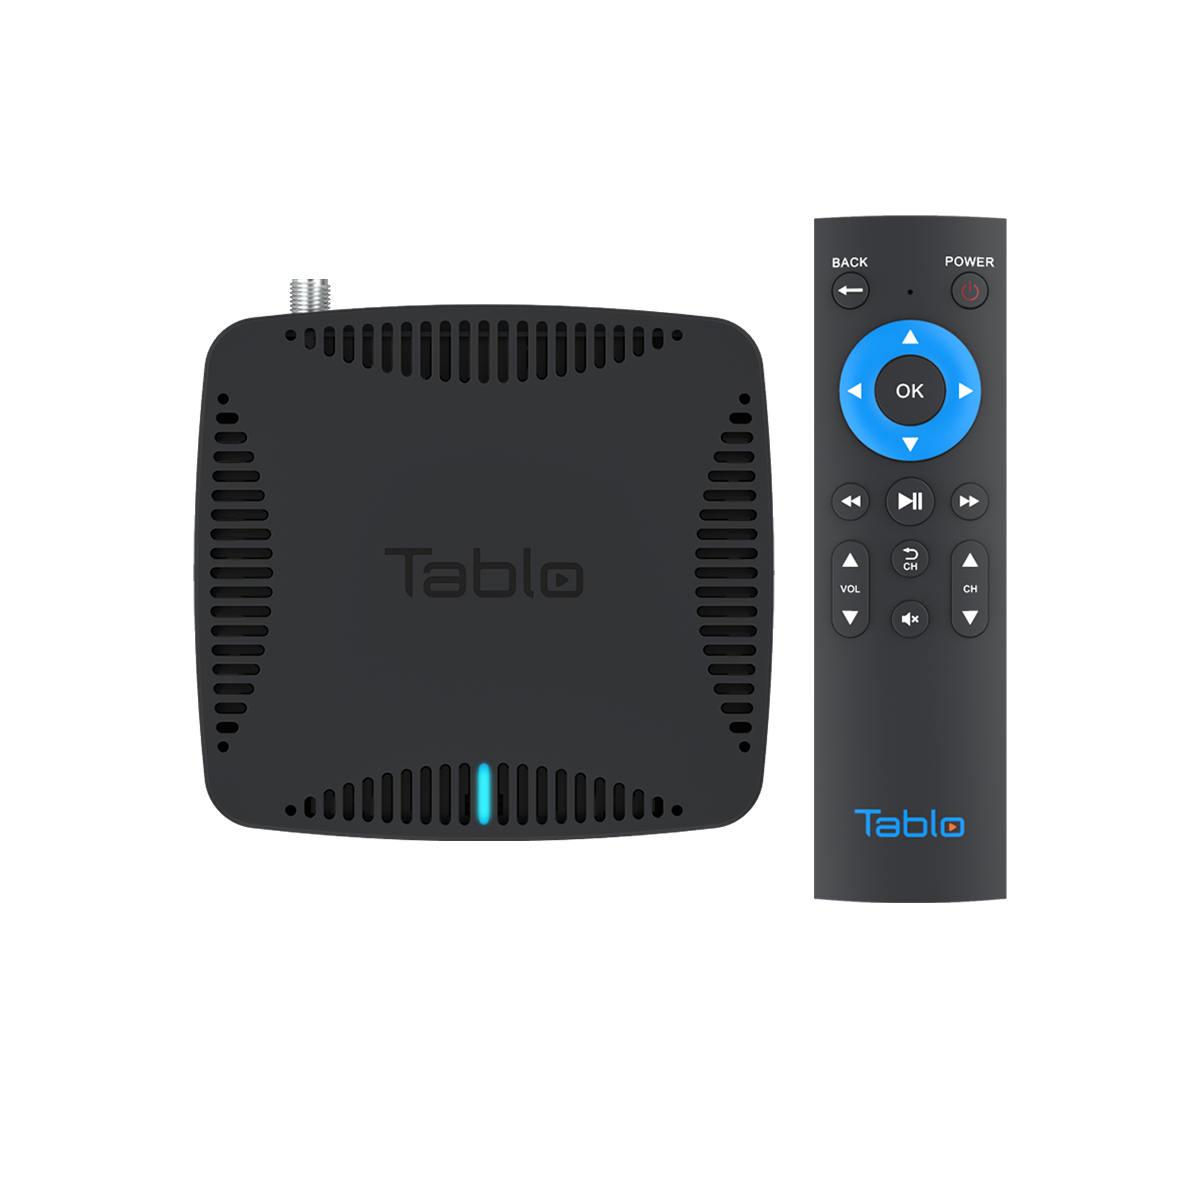 Tablo DUAL HDMI Over-The-Air (OTA) DVR (Digital Video Recorder) for Cord Cutters. DVR hardware with remote top view.